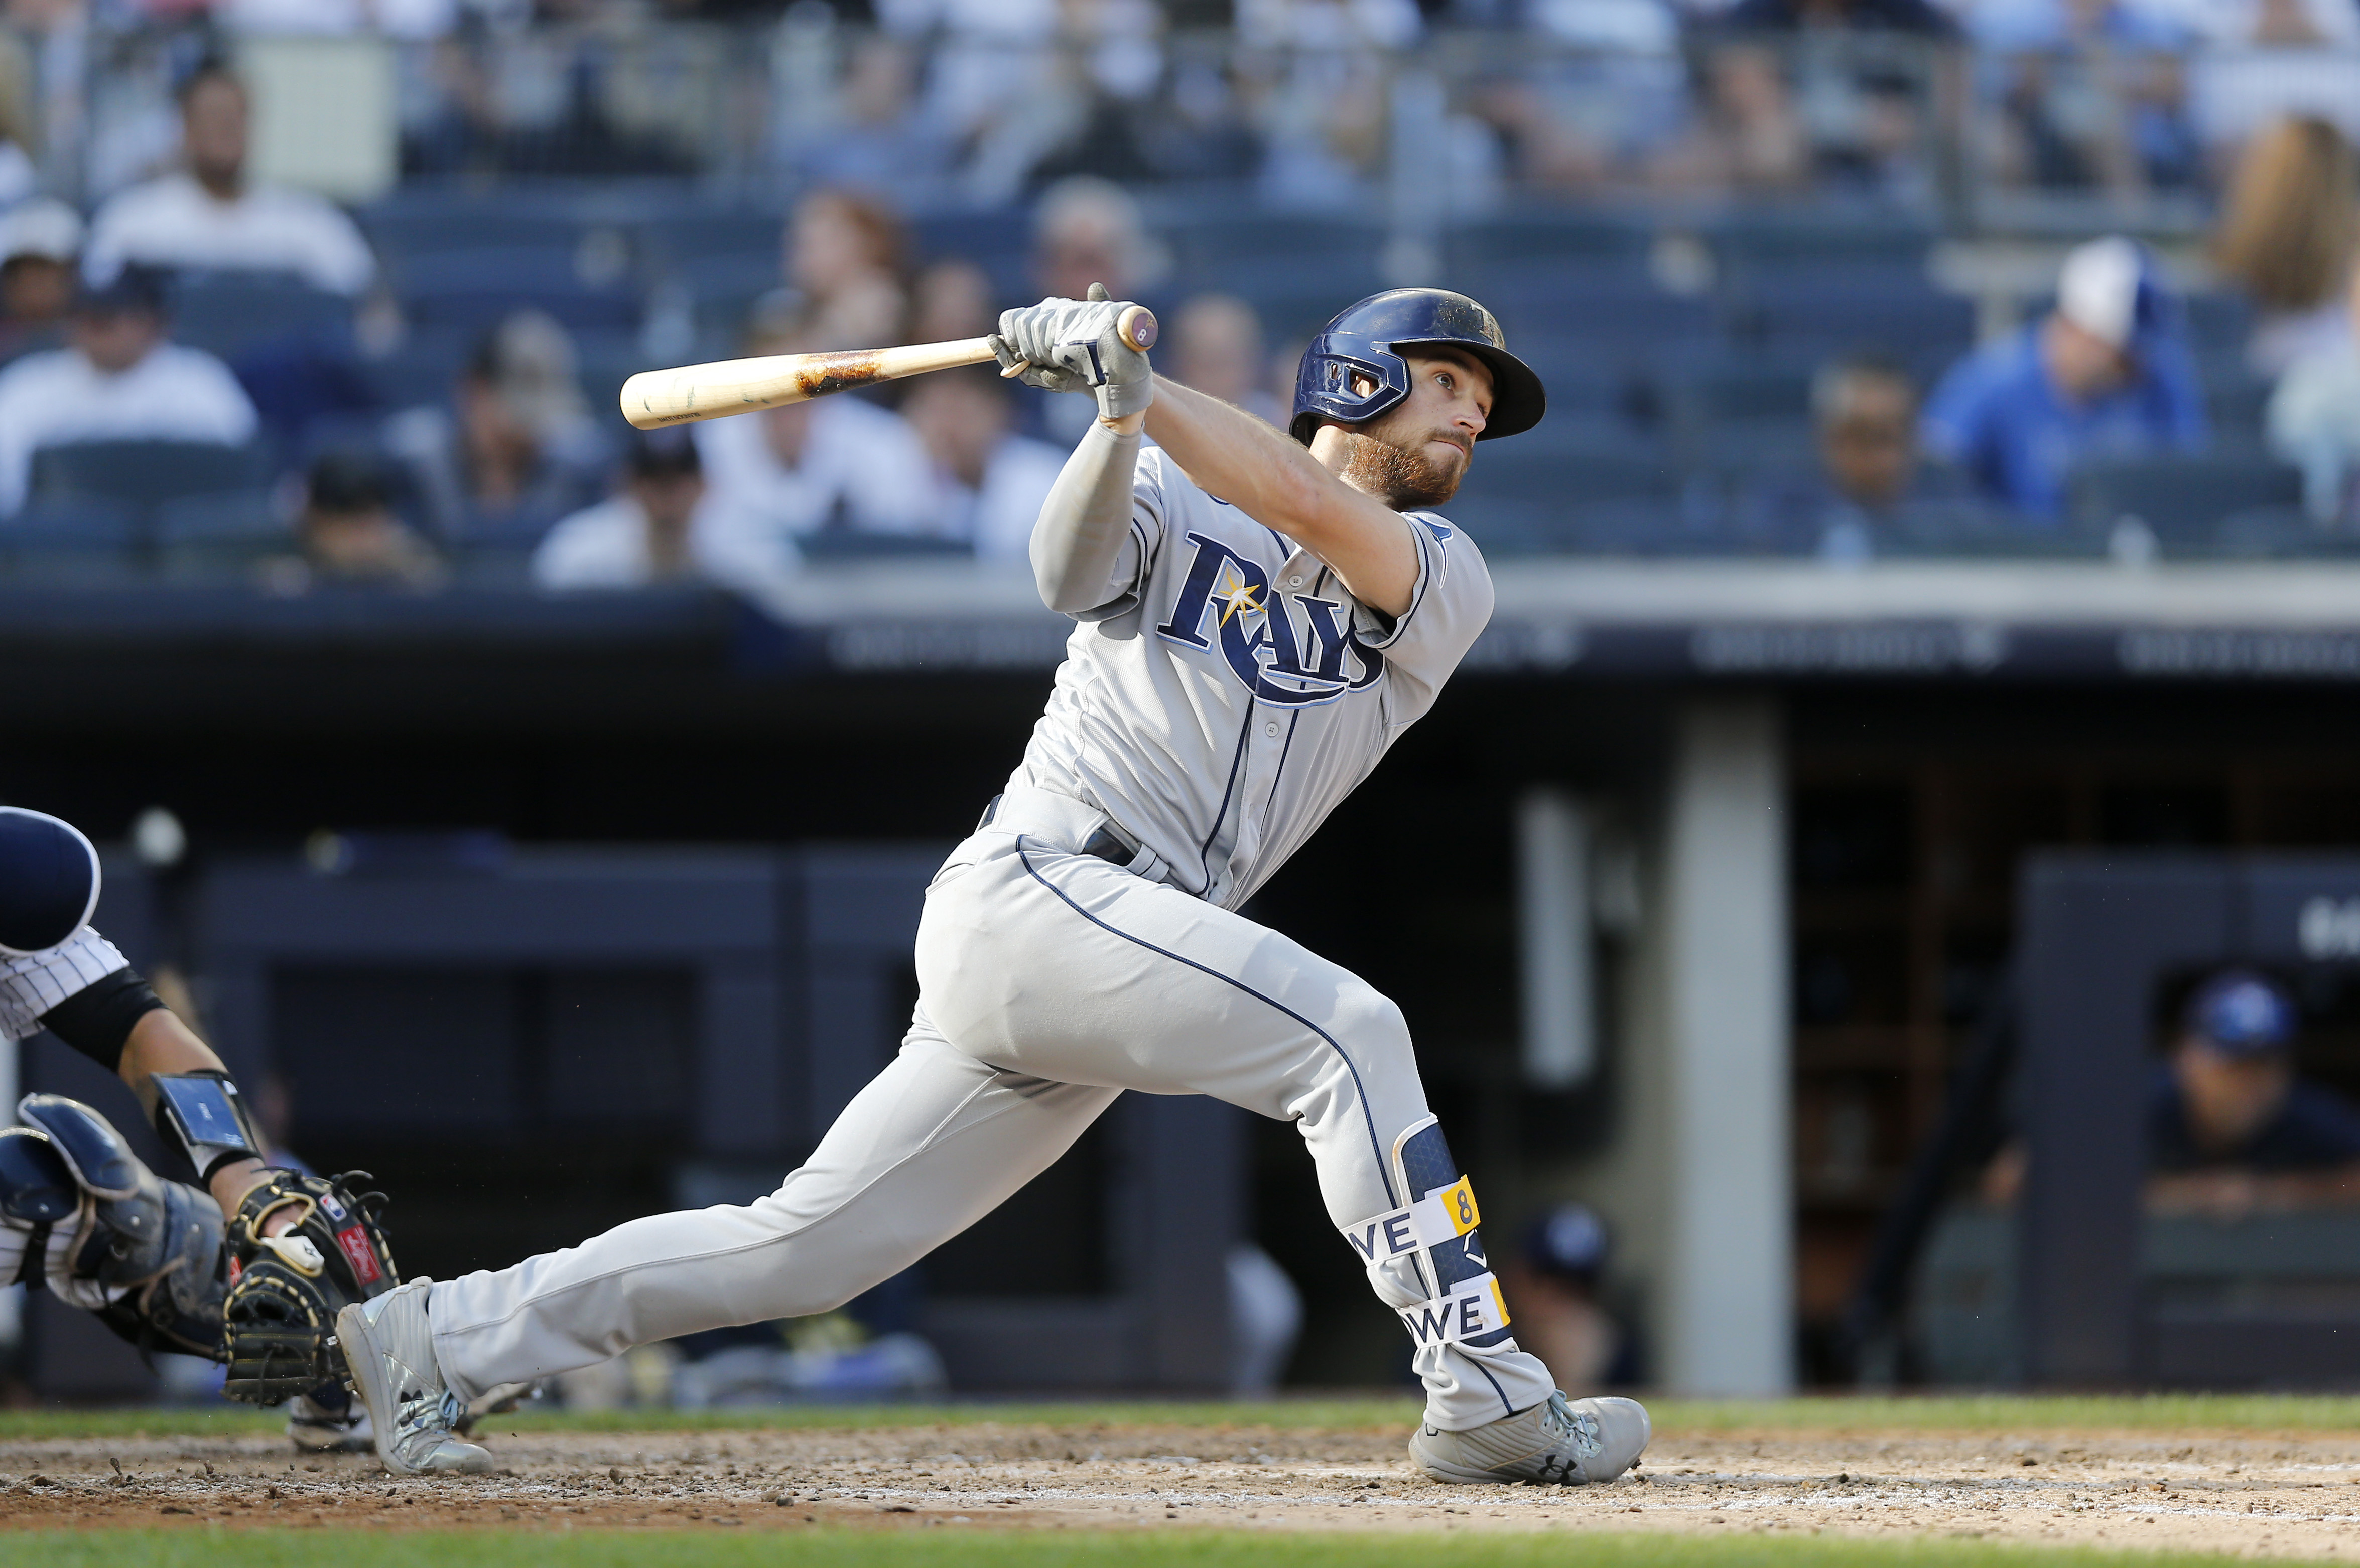 Jake Cronenworth wins rookie award from peers; Padres have two